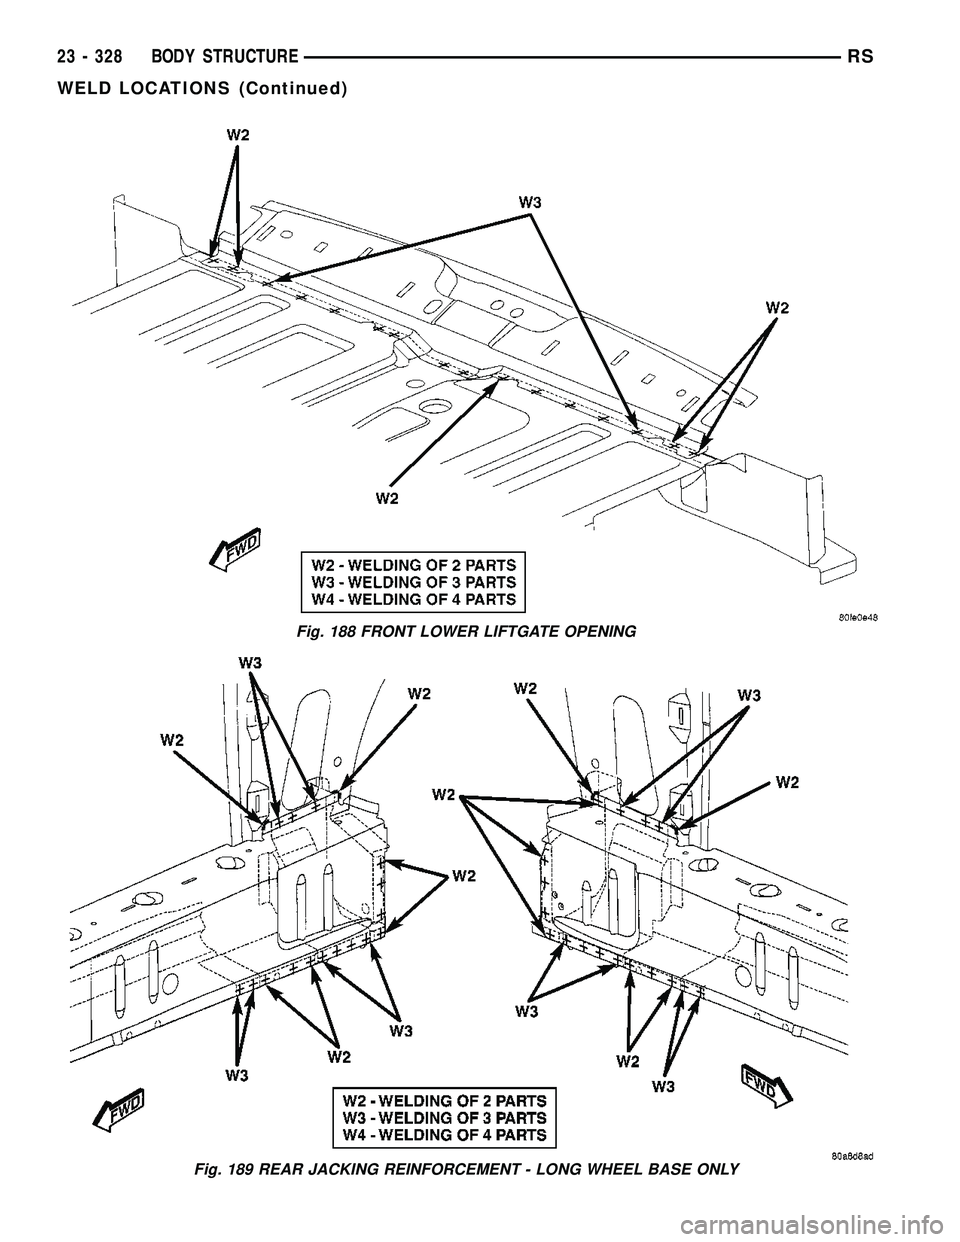 CHRYSLER CARAVAN 2005  Service Manual Fig. 188 FRONT LOWER LIFTGATE OPENING
Fig. 189 REAR JACKING REINFORCEMENT - LONG WHEEL BASE ONLY
23 - 328 BODY STRUCTURERS
WELD LOCATIONS (Continued) 